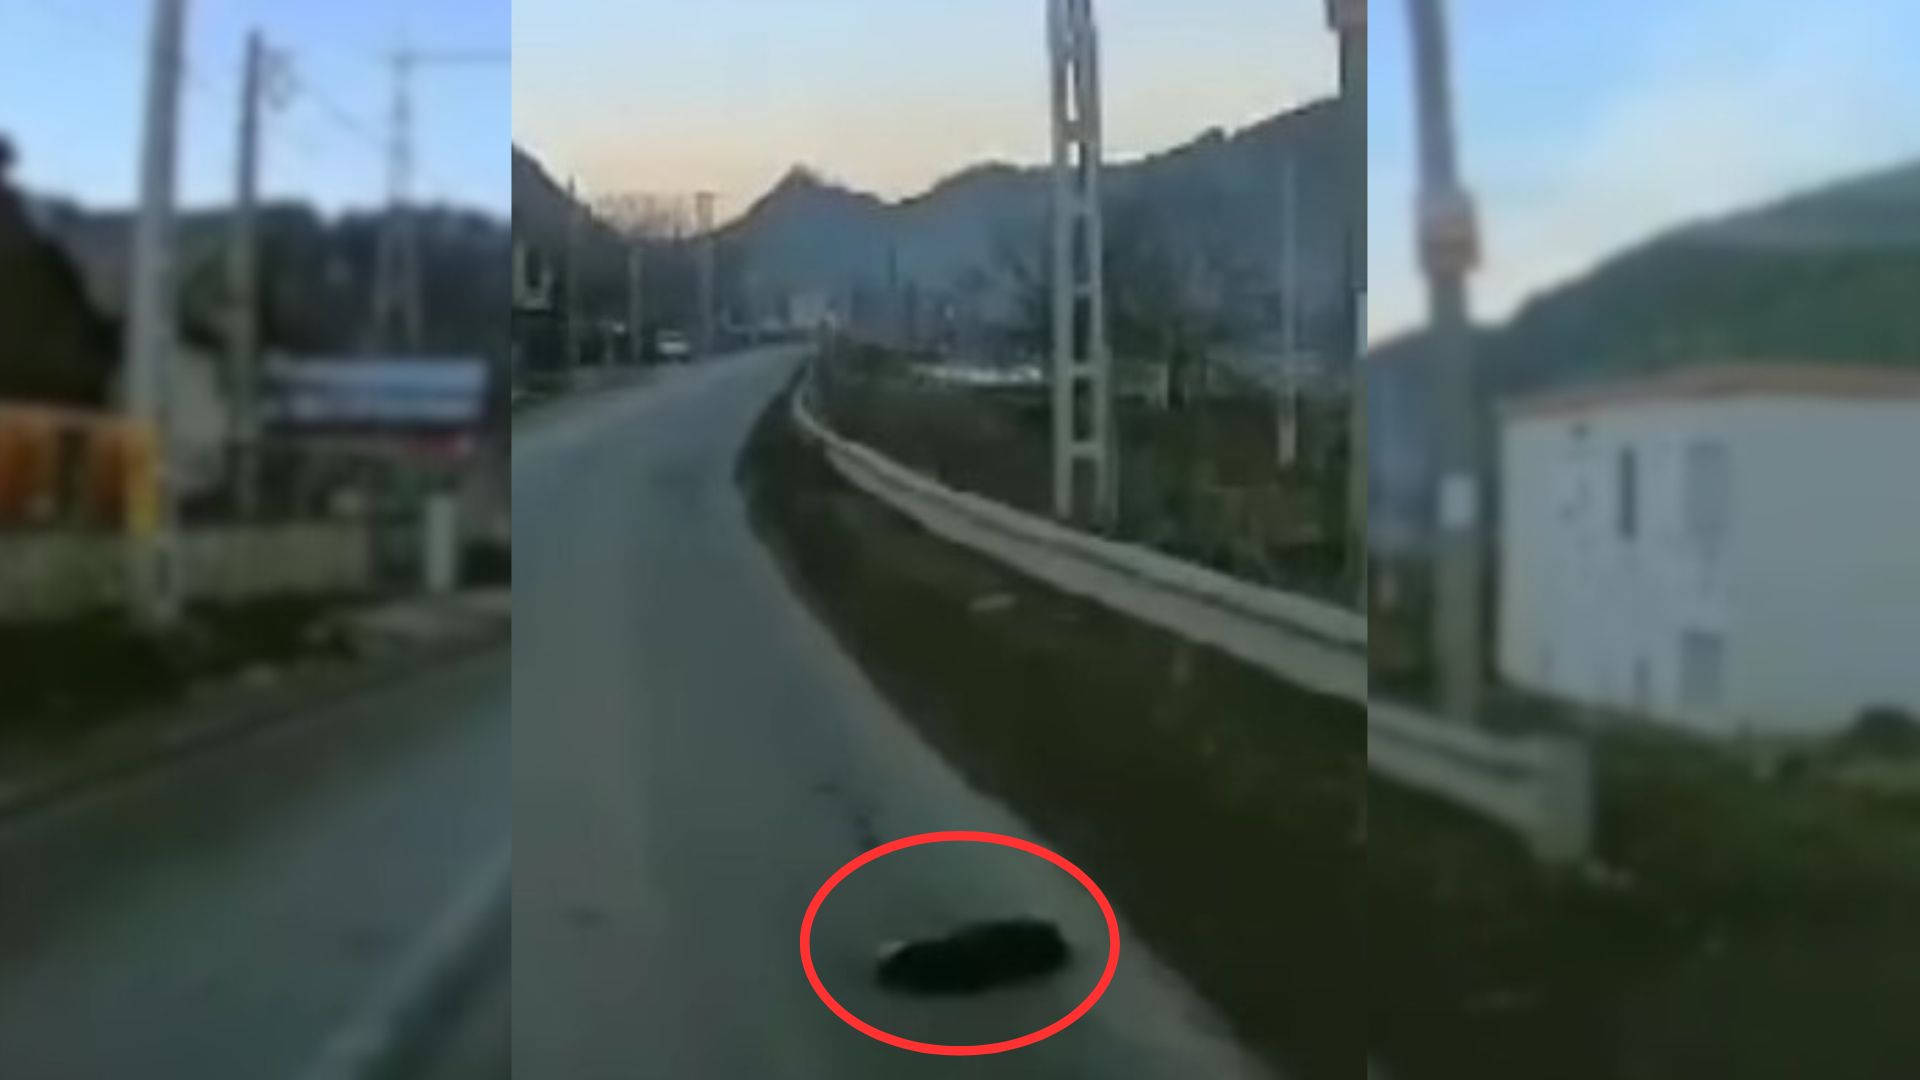 Man Who Noticed A Dark Lump On The Road Quickly Realized What It Was And Went To Help